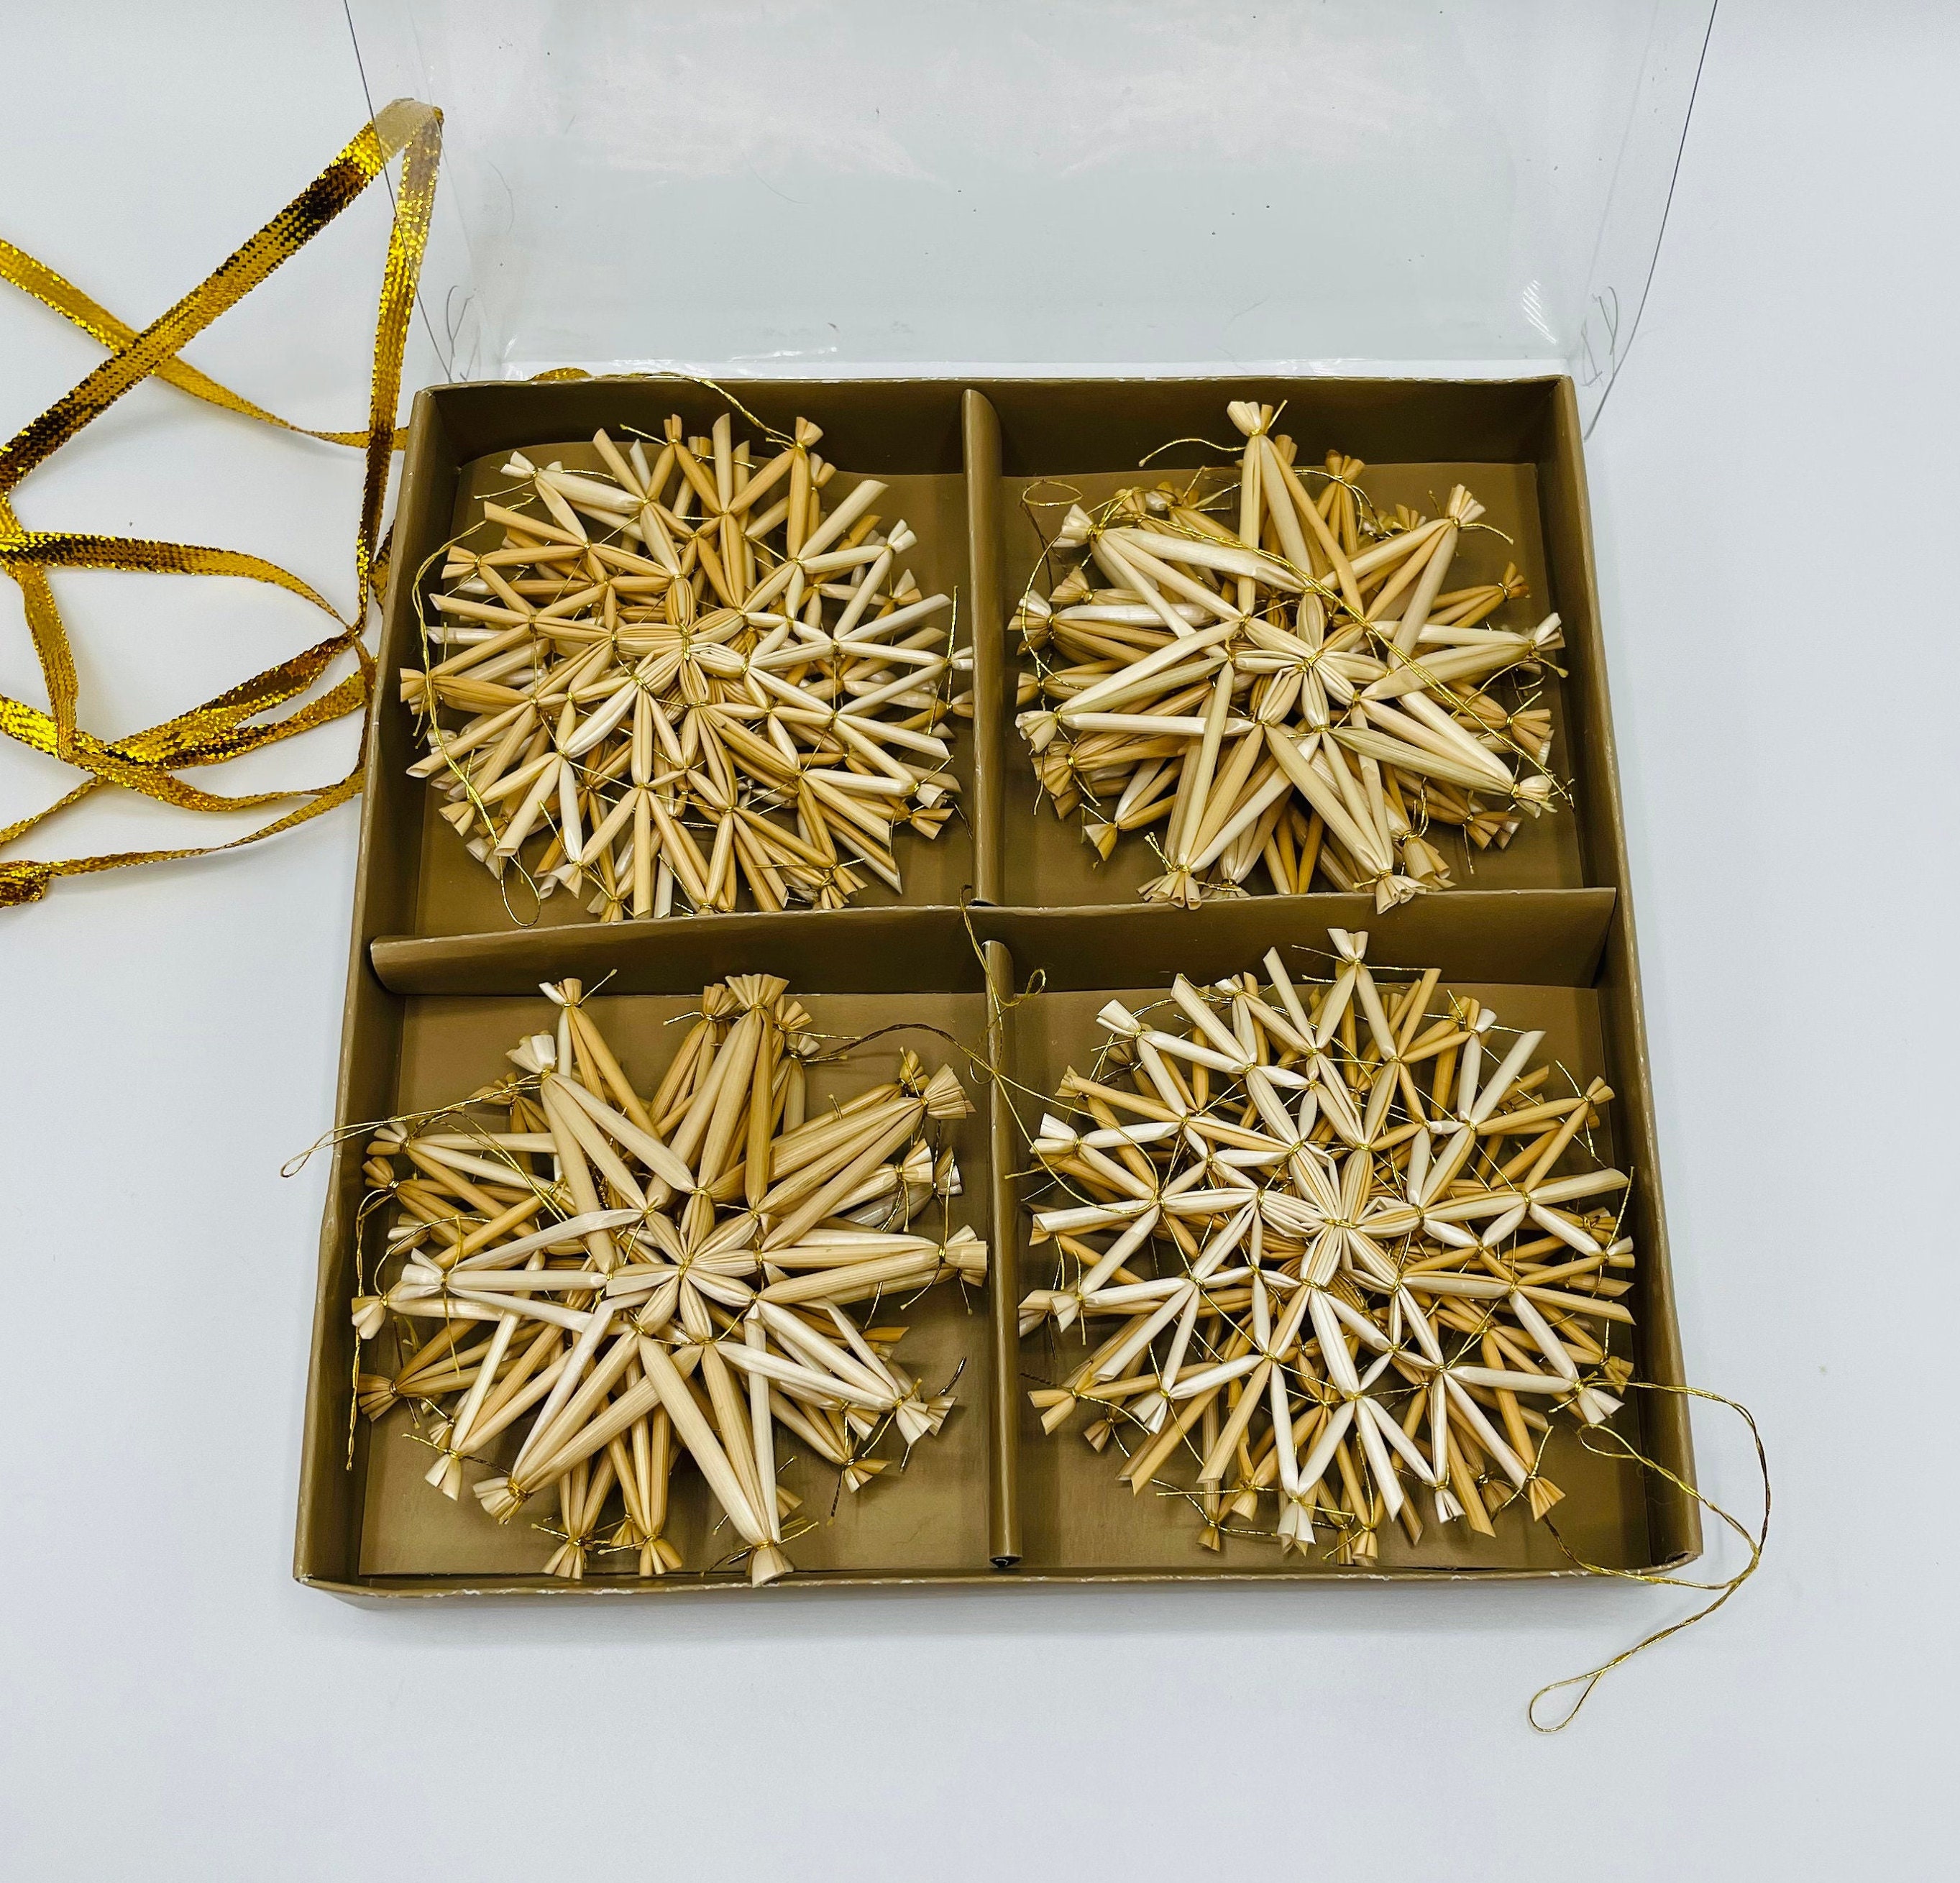 Straw snowflakes for hanging